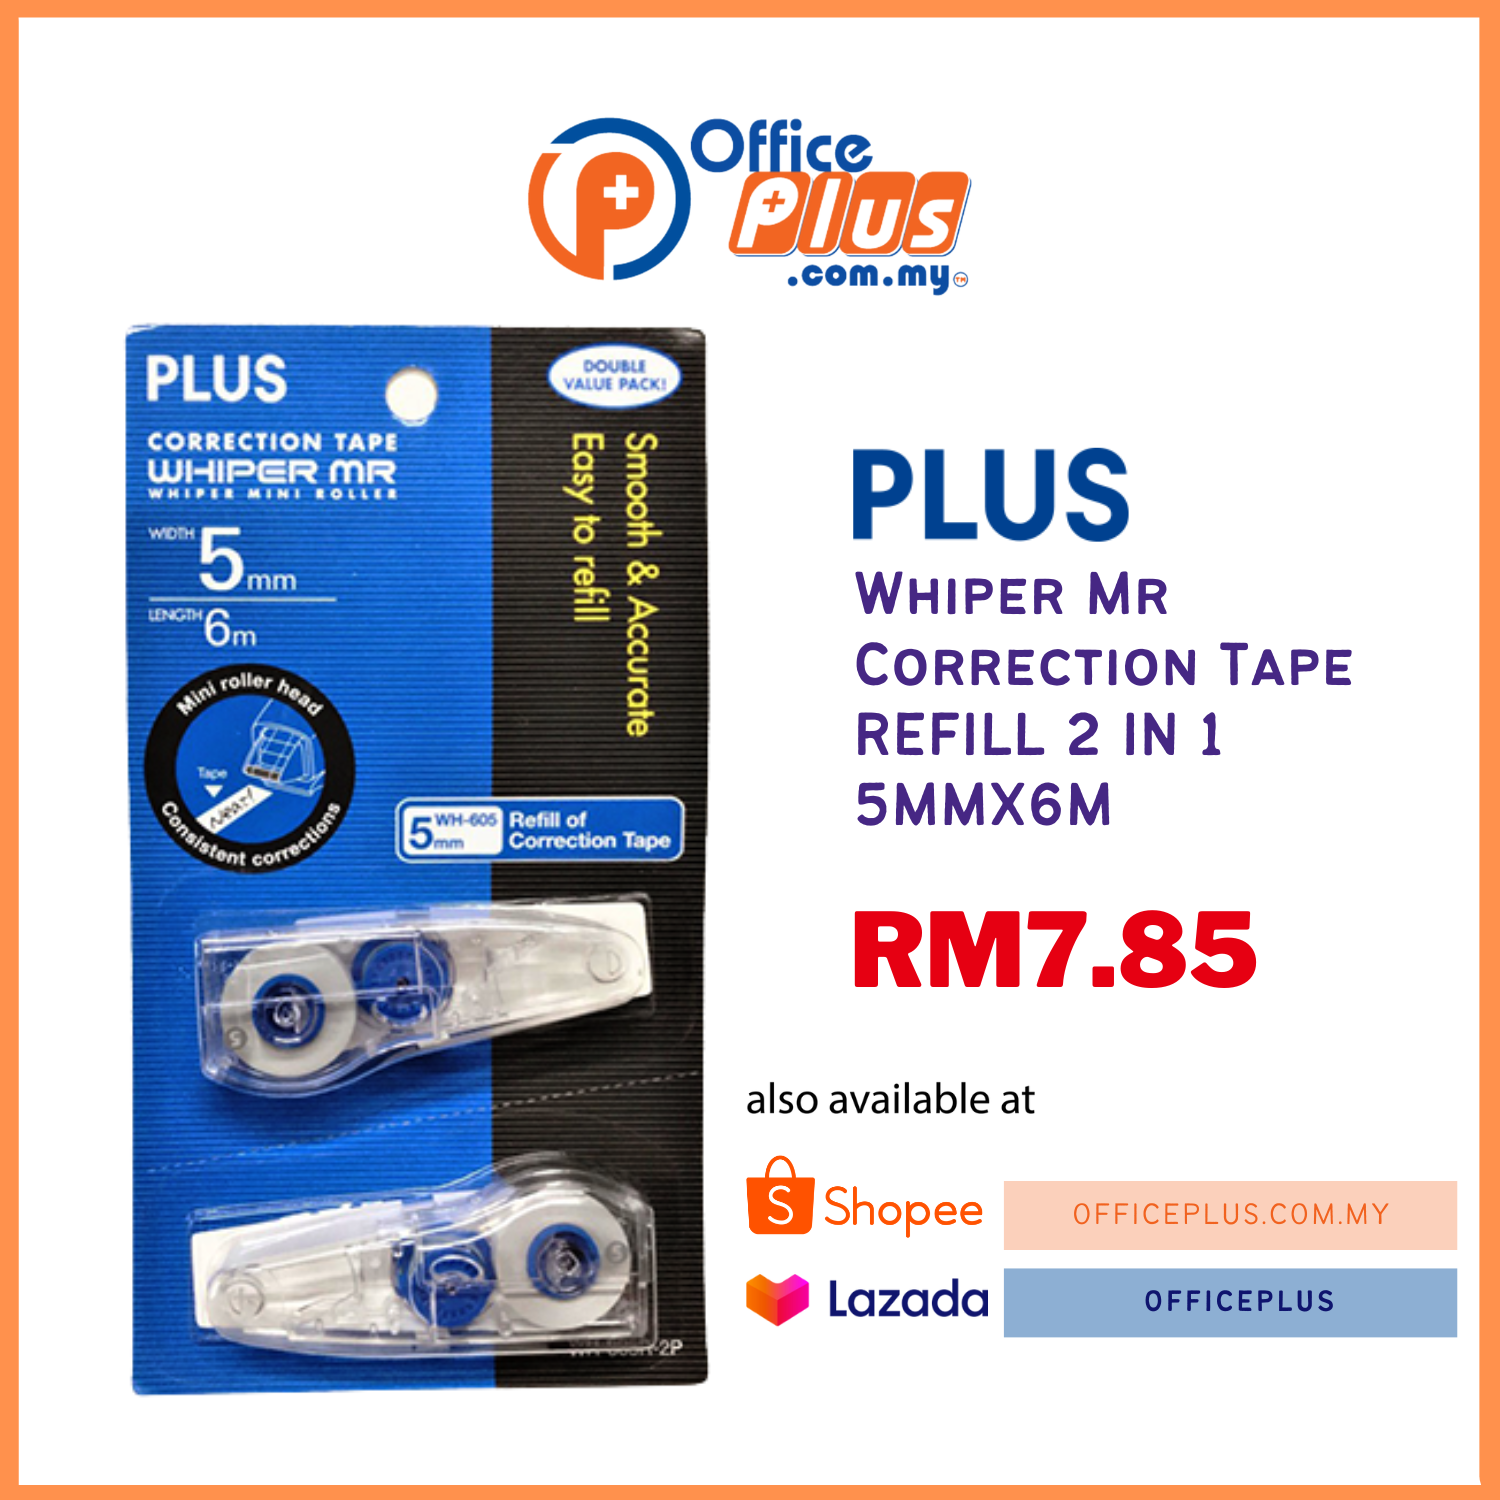 PLUS Whiper MR Correction Tape Refill 2in1 5mm x 6m - OfficePlus